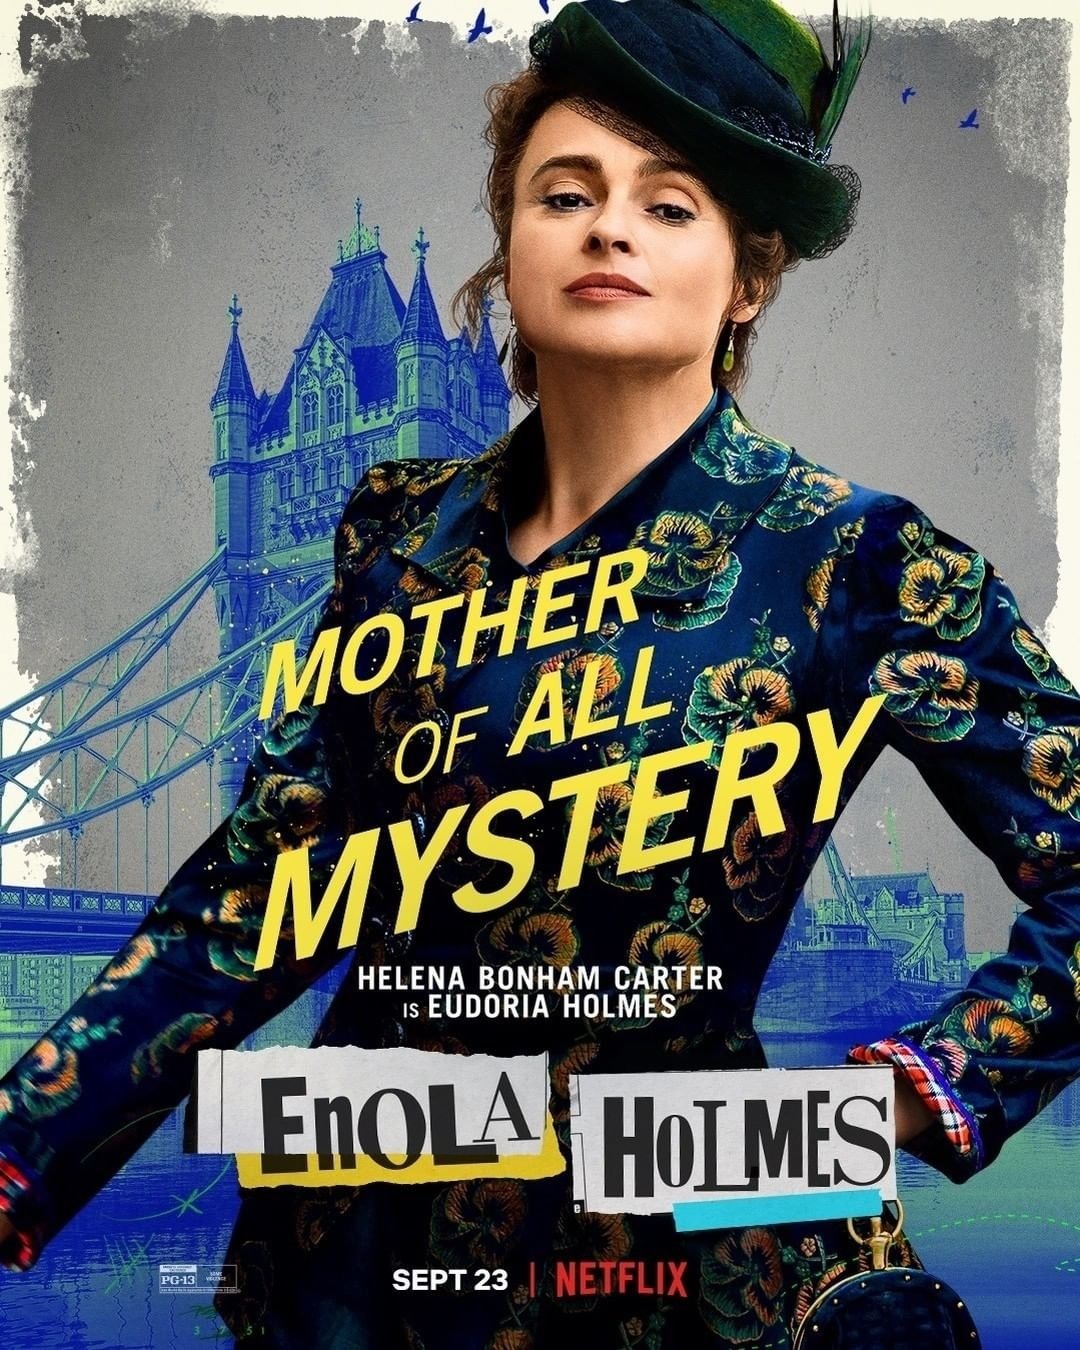 Extra Large TV Poster Image for Enola Holmes (#4 of 9)